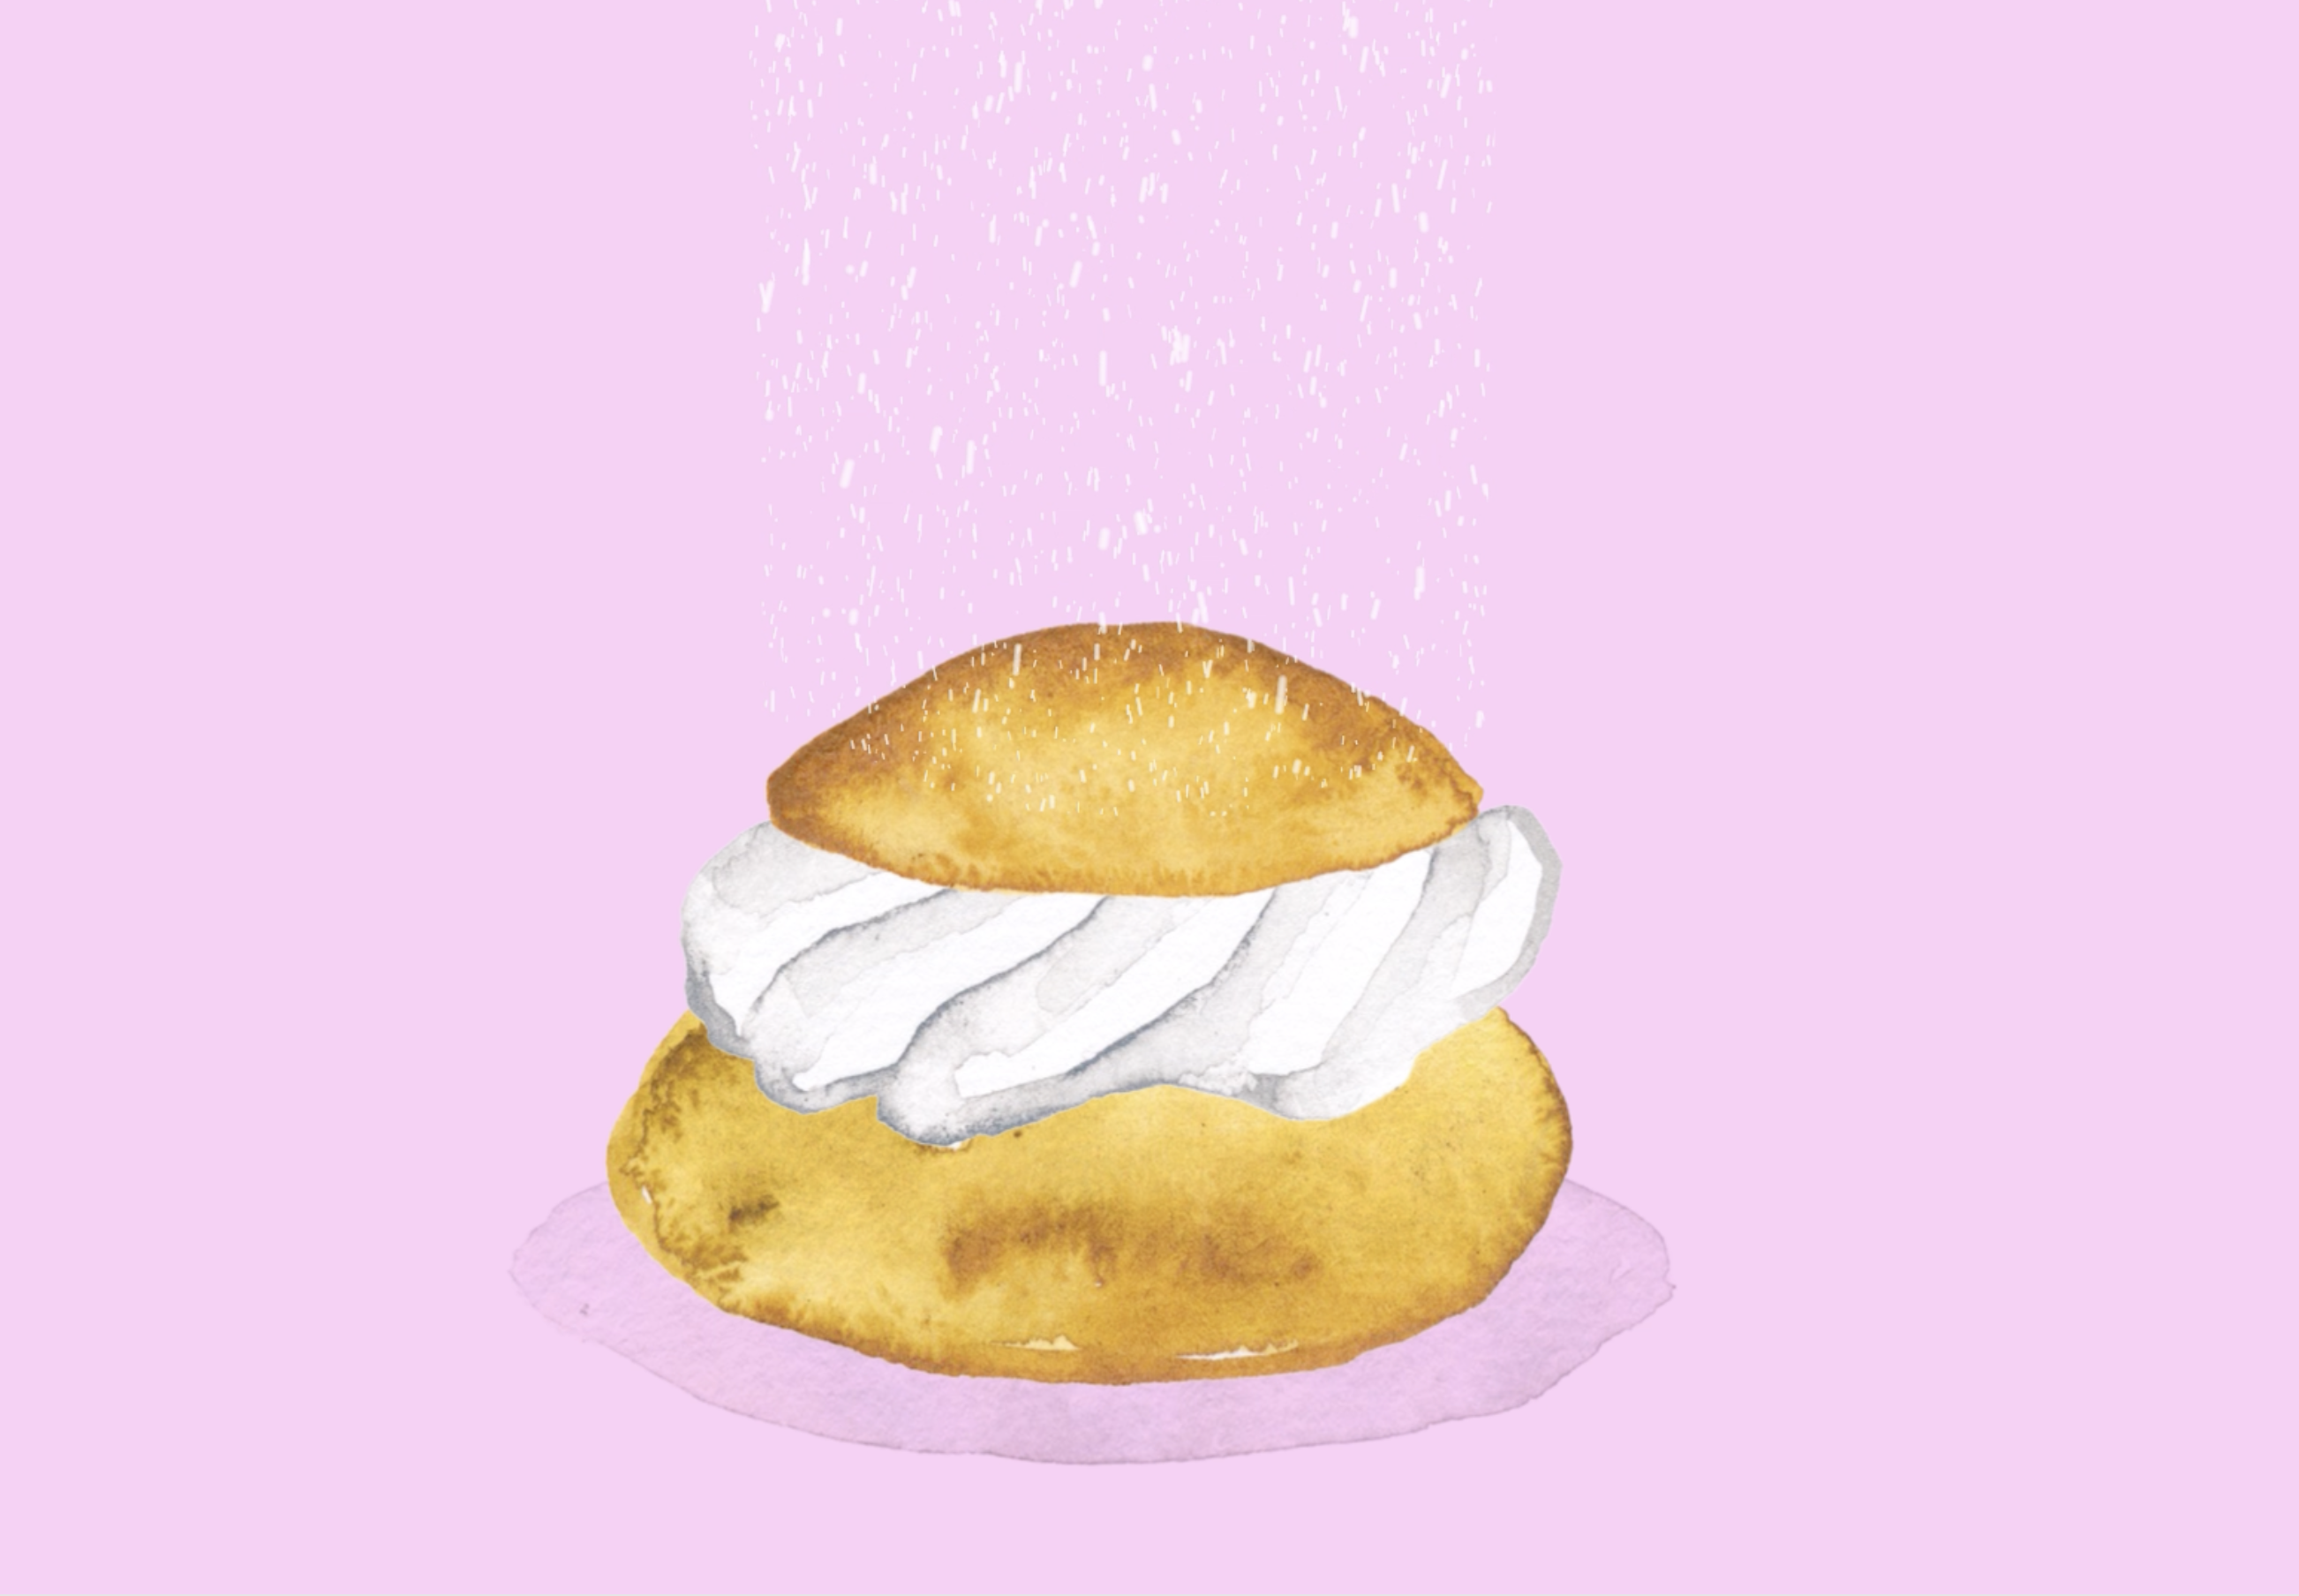 A semla made in After effects